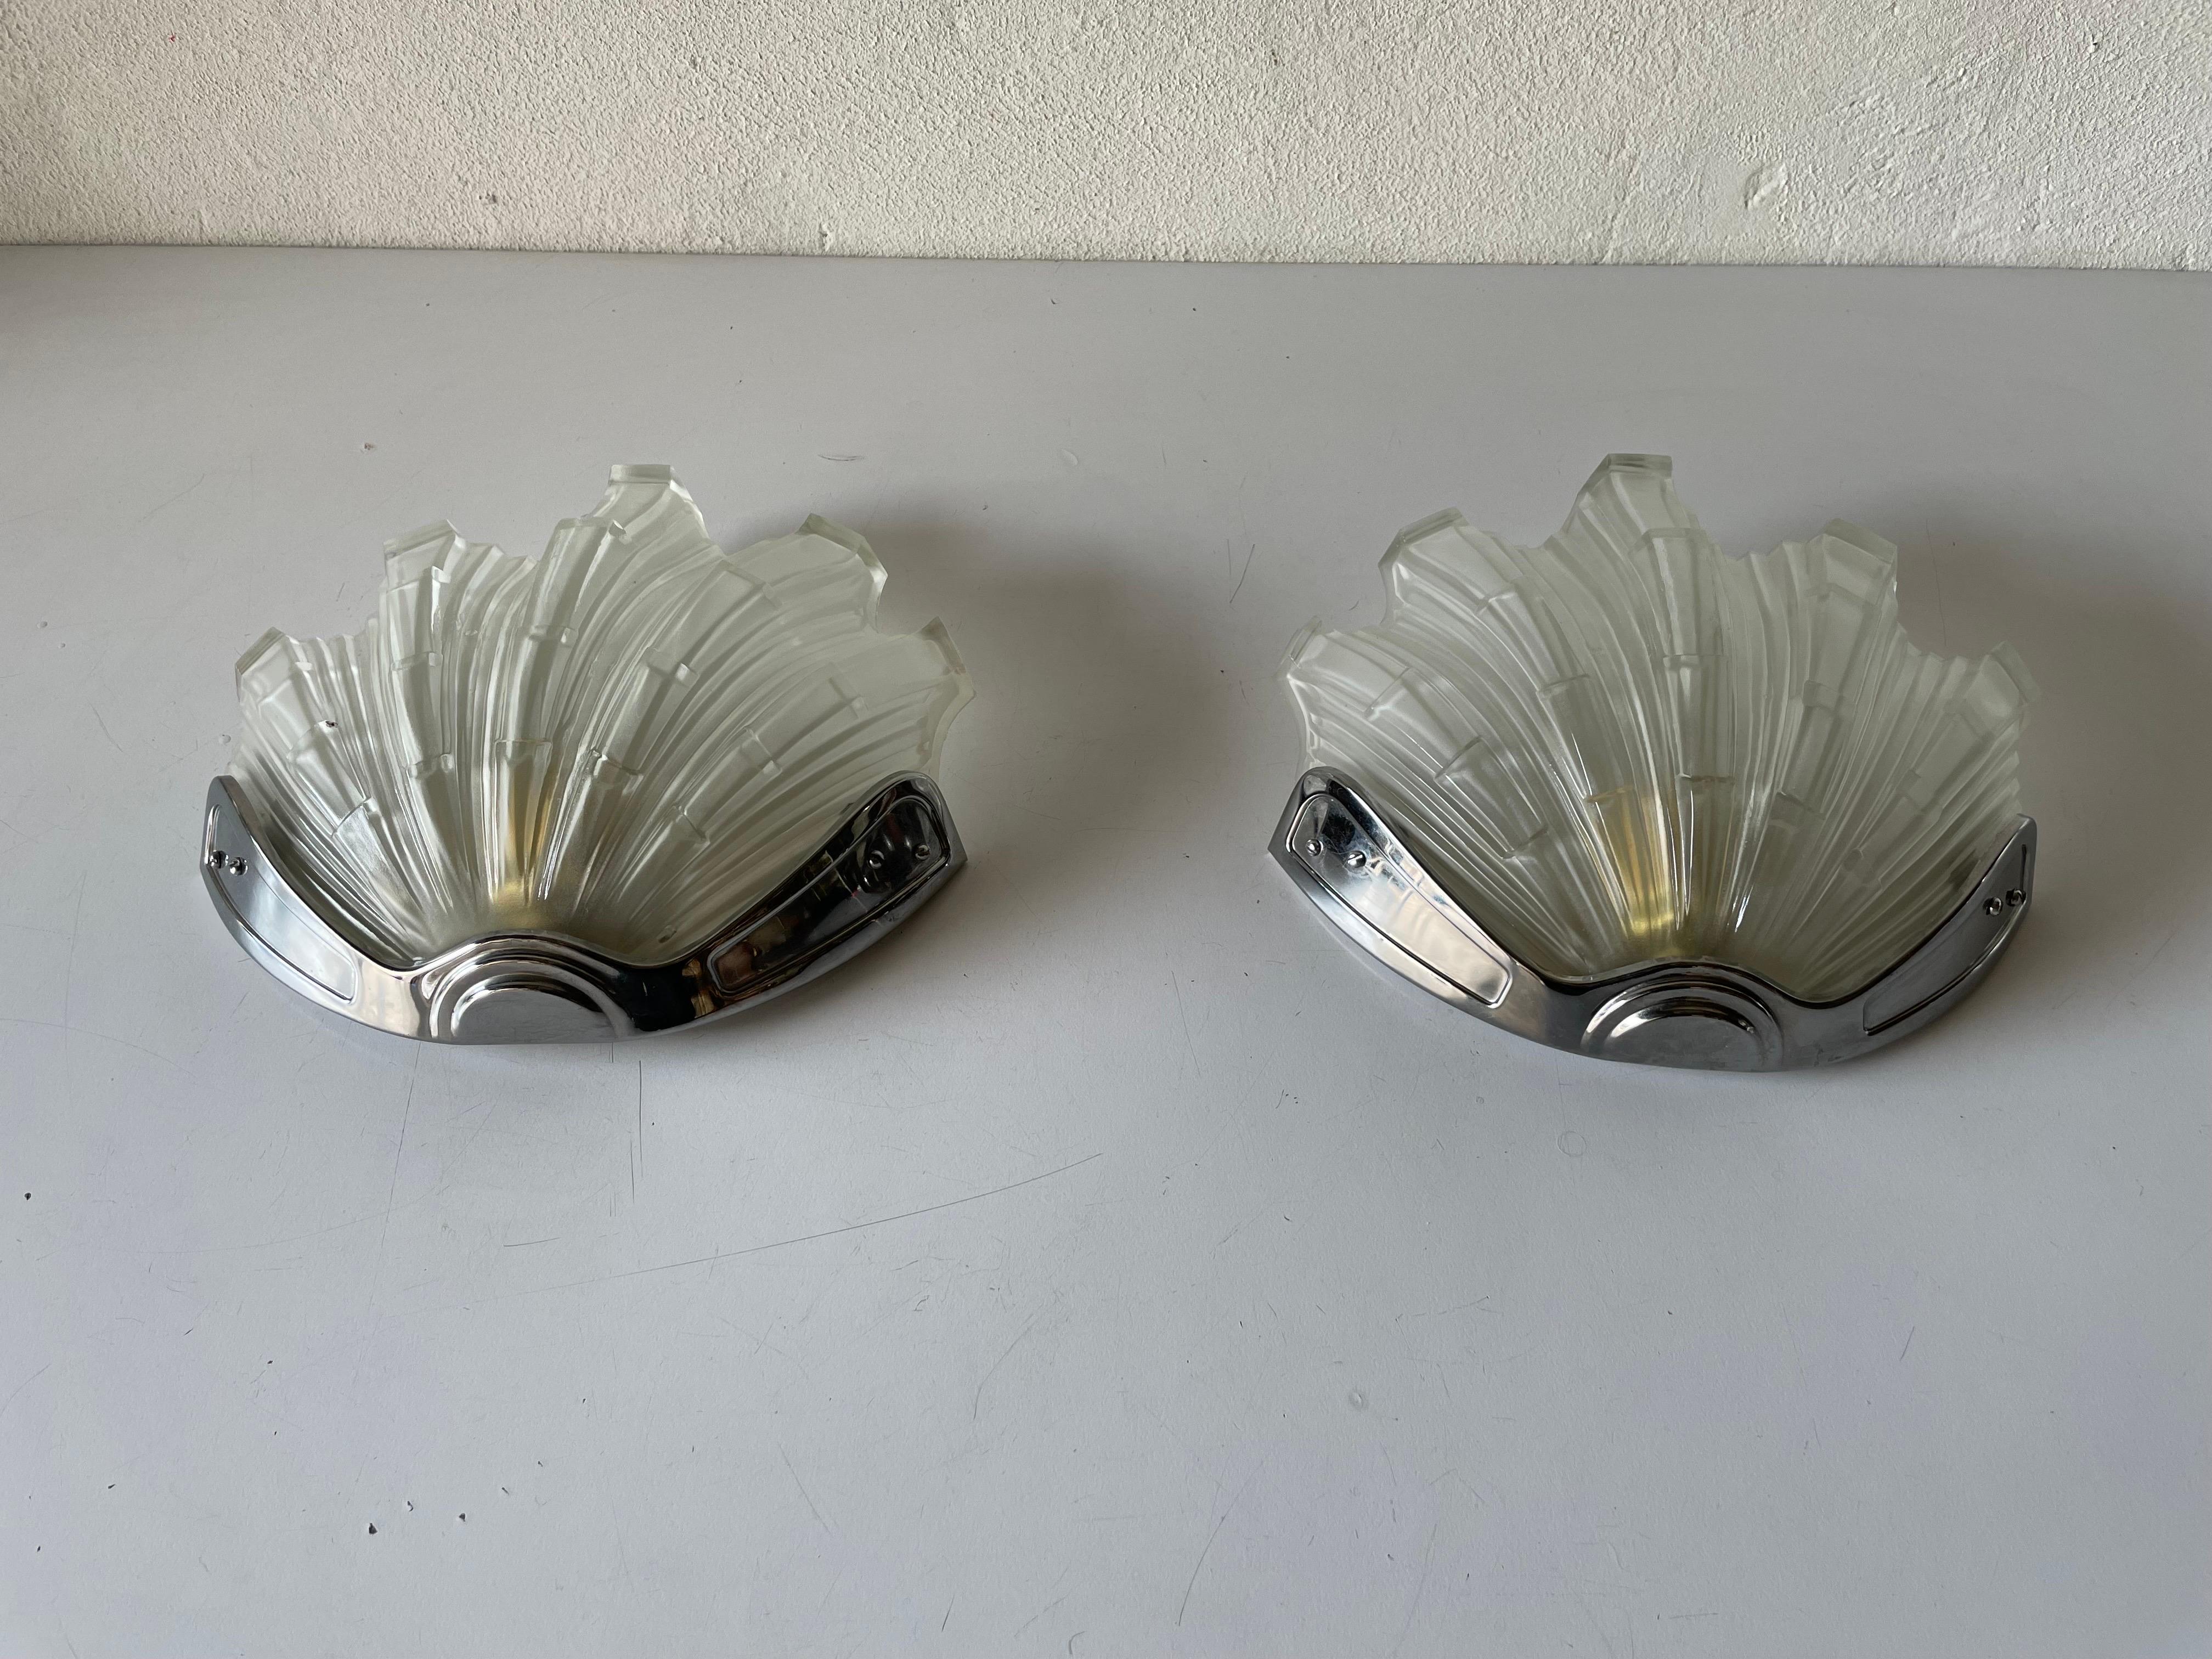 Art Deco stil shell design pair of sconces, 1960s, Germany

Very elegant and Minimalist wall lamps

Lamps are in very good condition.

These lamps works with E27 standard light bulbs. Each lamp works with one light bulb. 
Wired and suitable